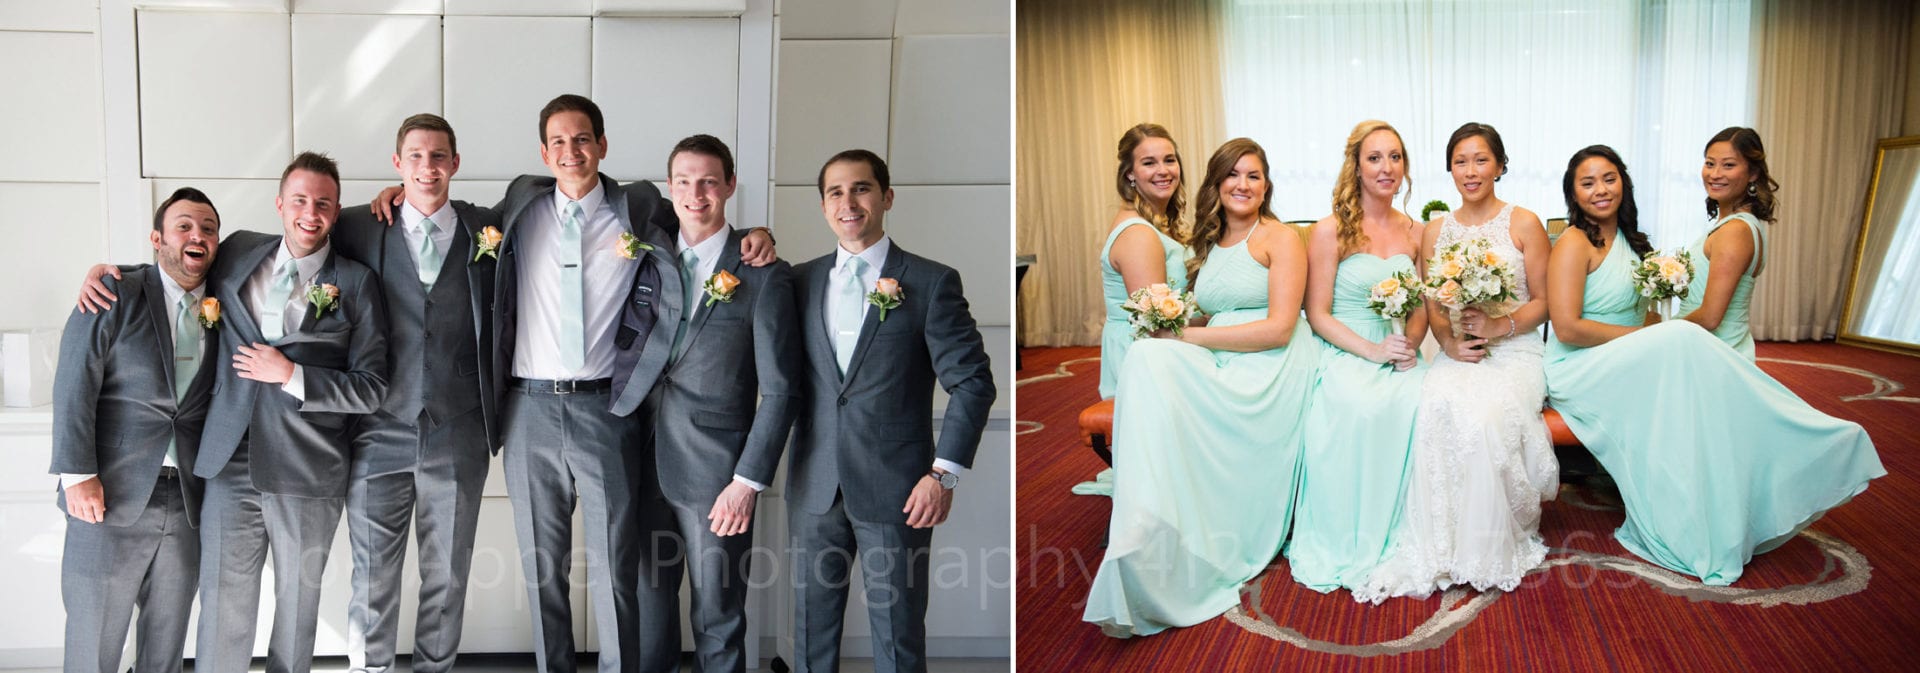 a groom and groomsmen in gray suits next to a bride and her bridesmaids in mint green dresses